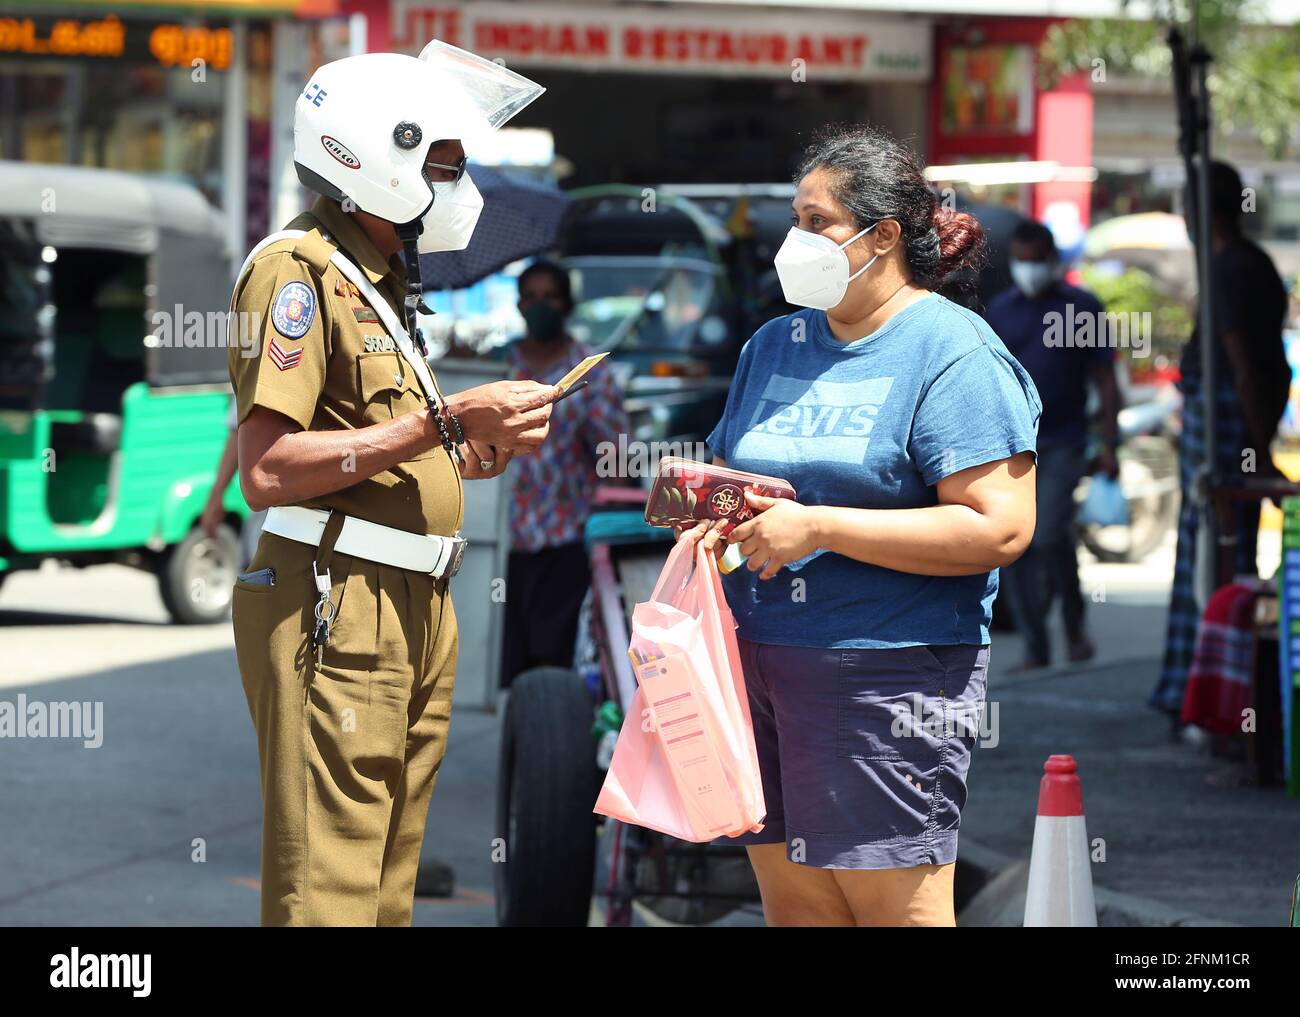 Colombo, Sri Lanka. 17th May, 2021. A police officer checks identification cards as authorities impose an identification card system to restrict movement of people in the face of a third wave of COVID-19 in Colombo, Sri Lanka, May 17, 2021. Credit: Ajith Perera/Xinhua/Alamy Live News Stock Photo